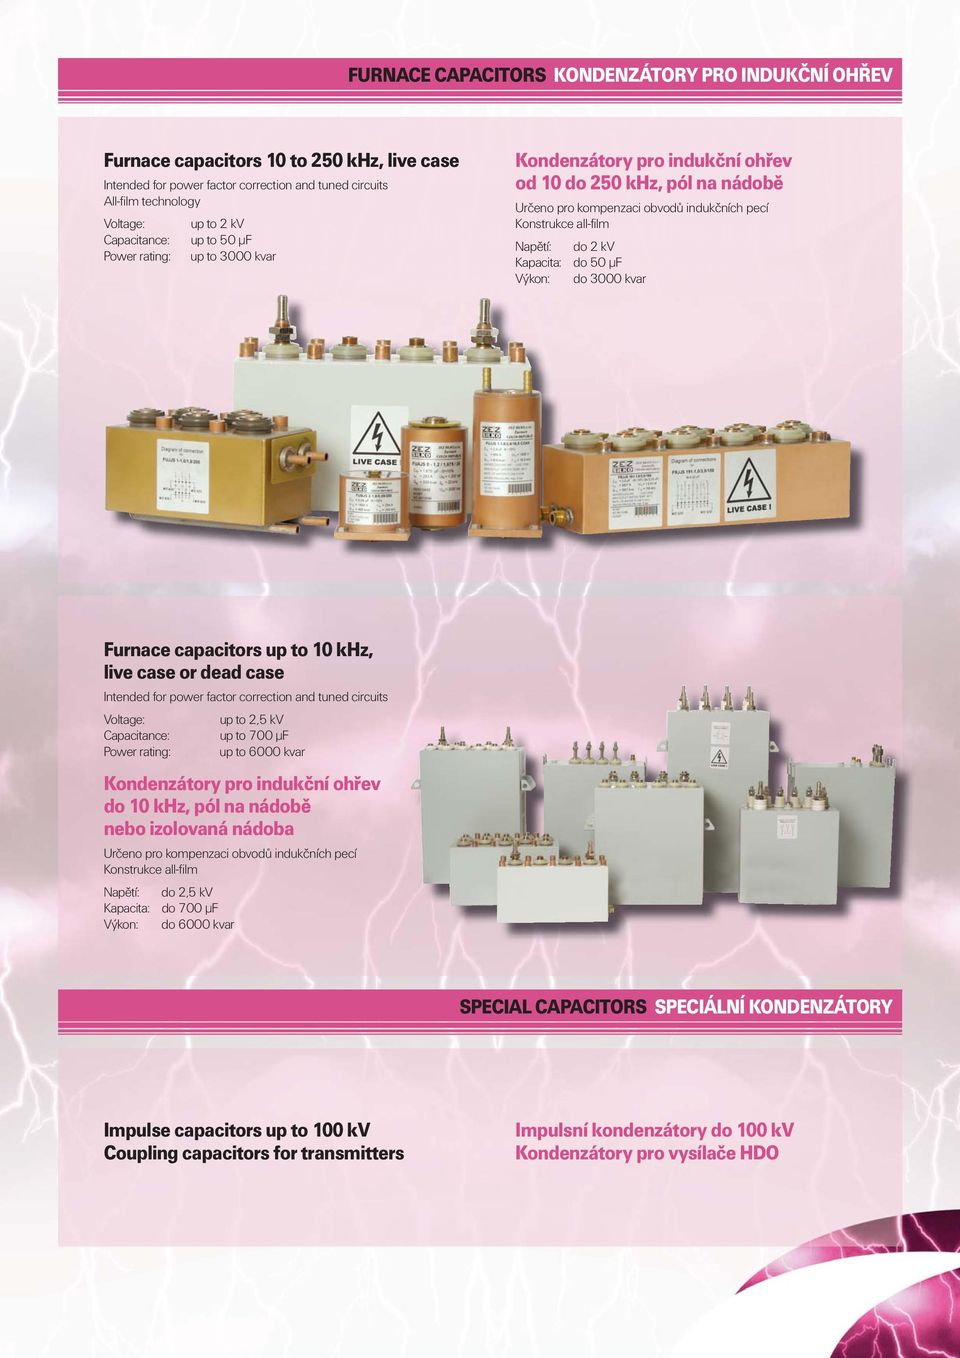 Kapacita: do 50 μf Výkon: do 3000 kvar Furnace capacitors up to 10 khz, live case or dead case Intended for power factor correction and tuned circuits Voltage: up to 2,5 kv Capacitance: up to 700 μf